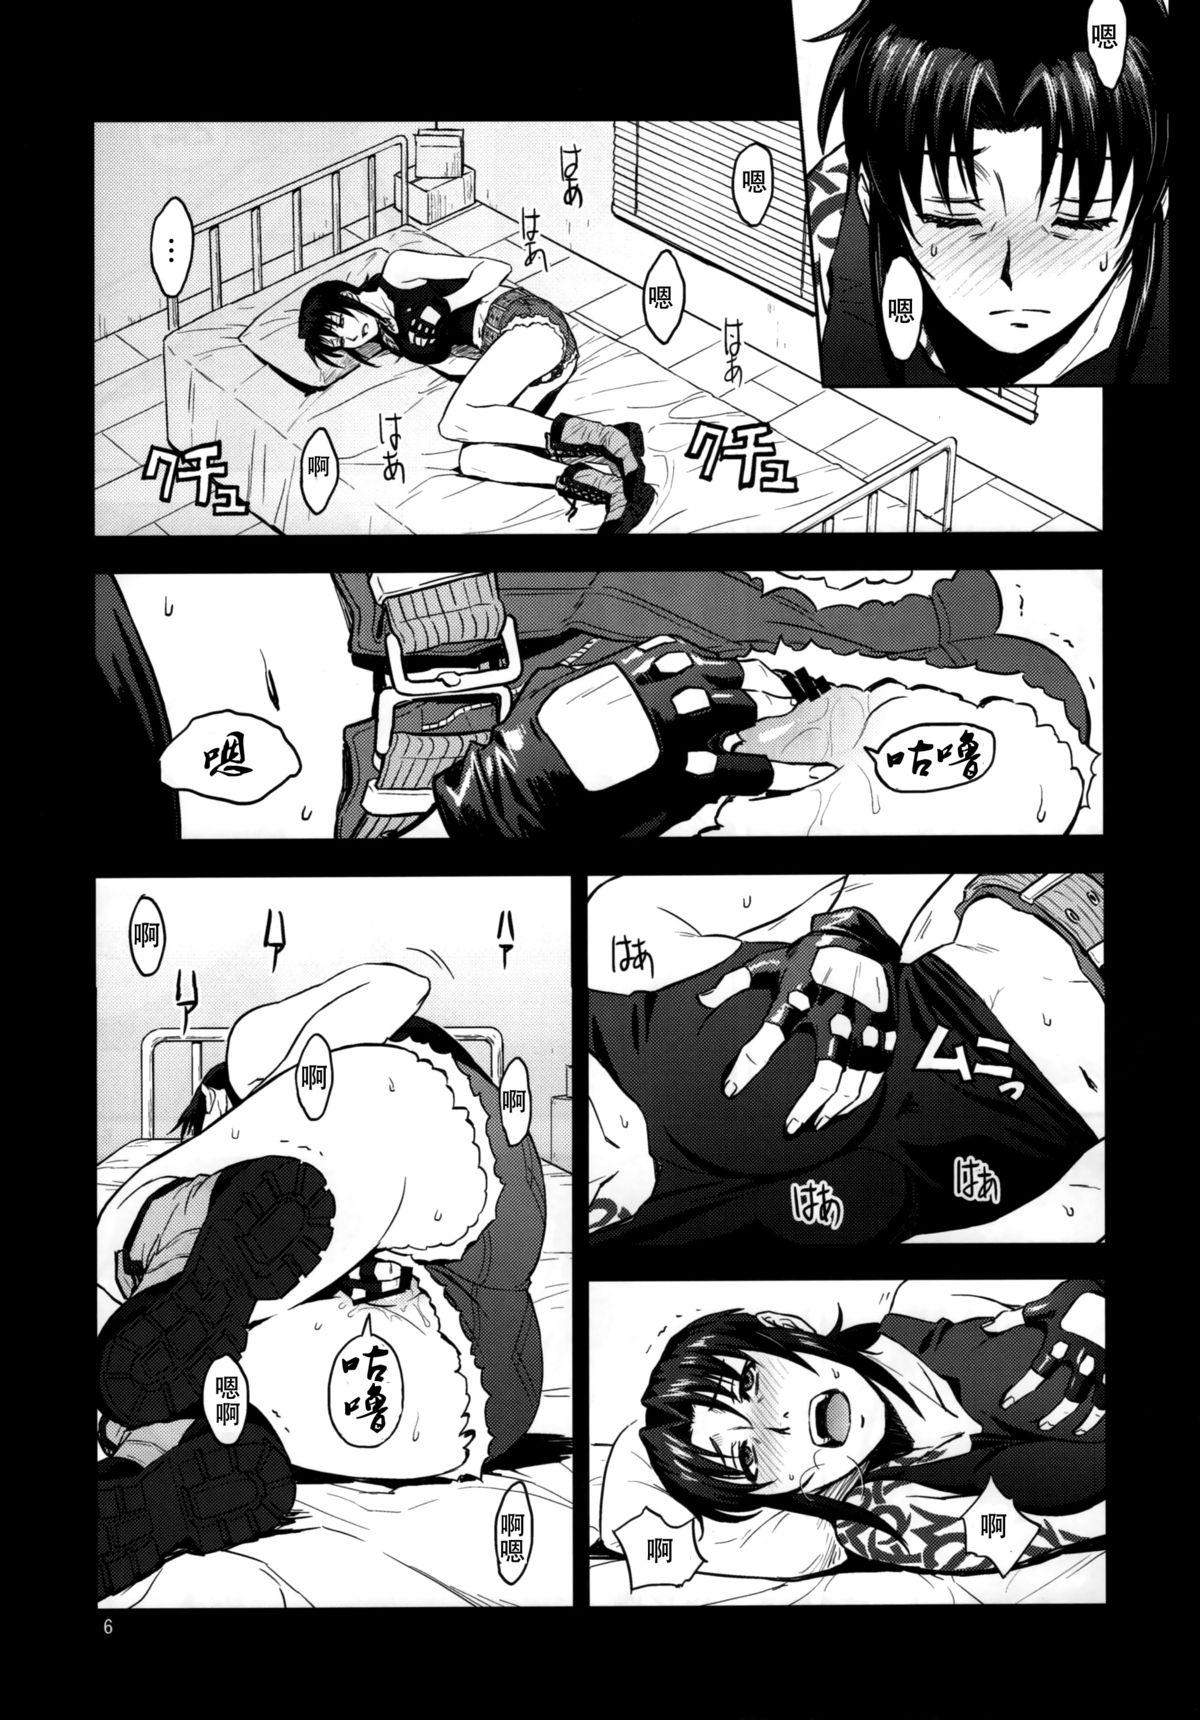 Free Rough Sex Porn Sick from drinking - Black lagoon Celeb - Page 7